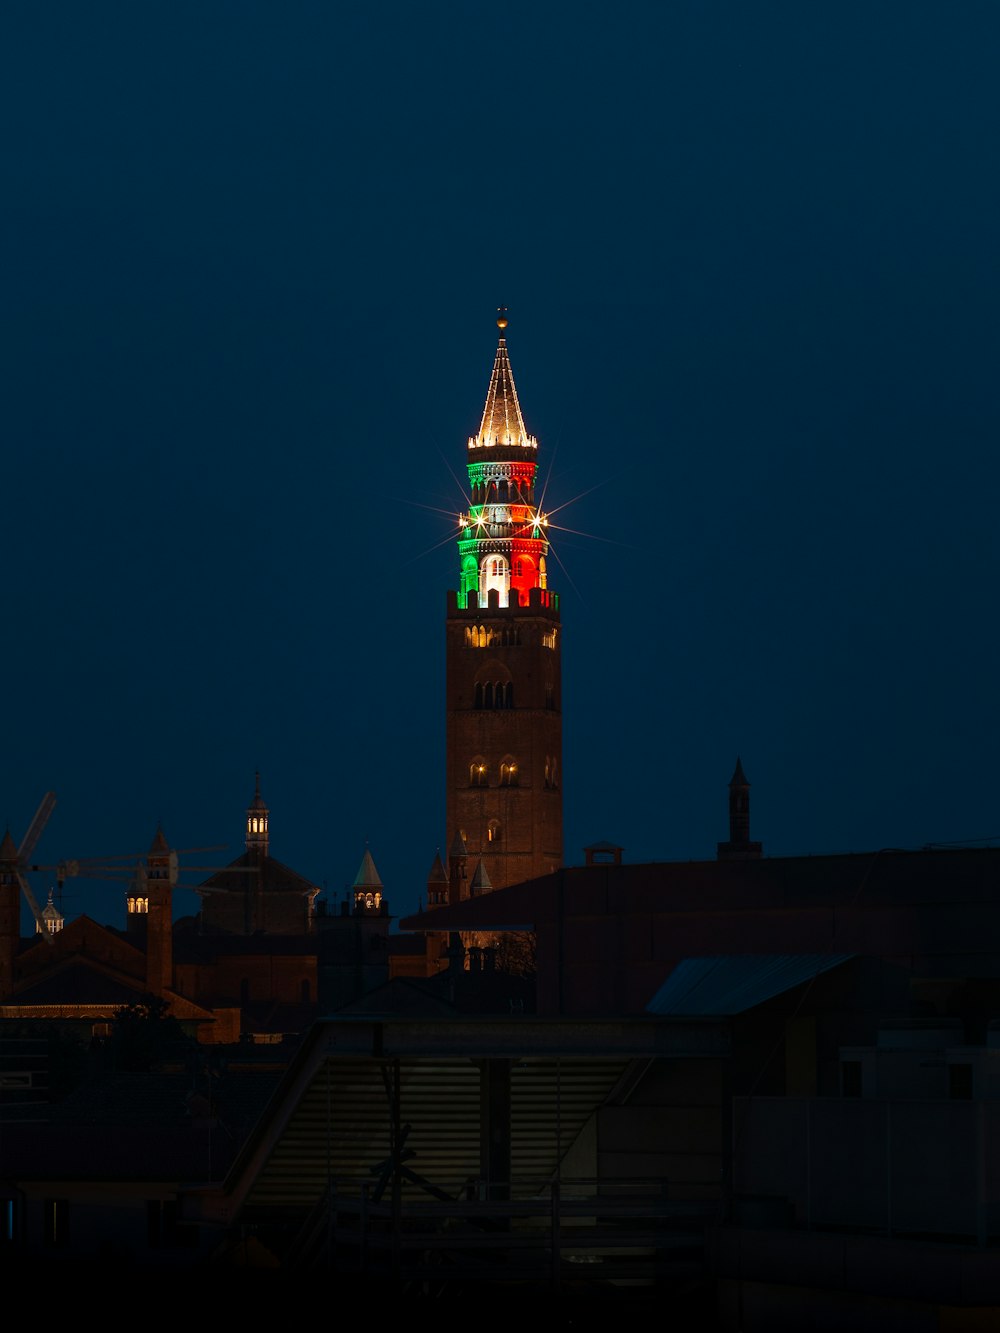 brown and red tower during night time